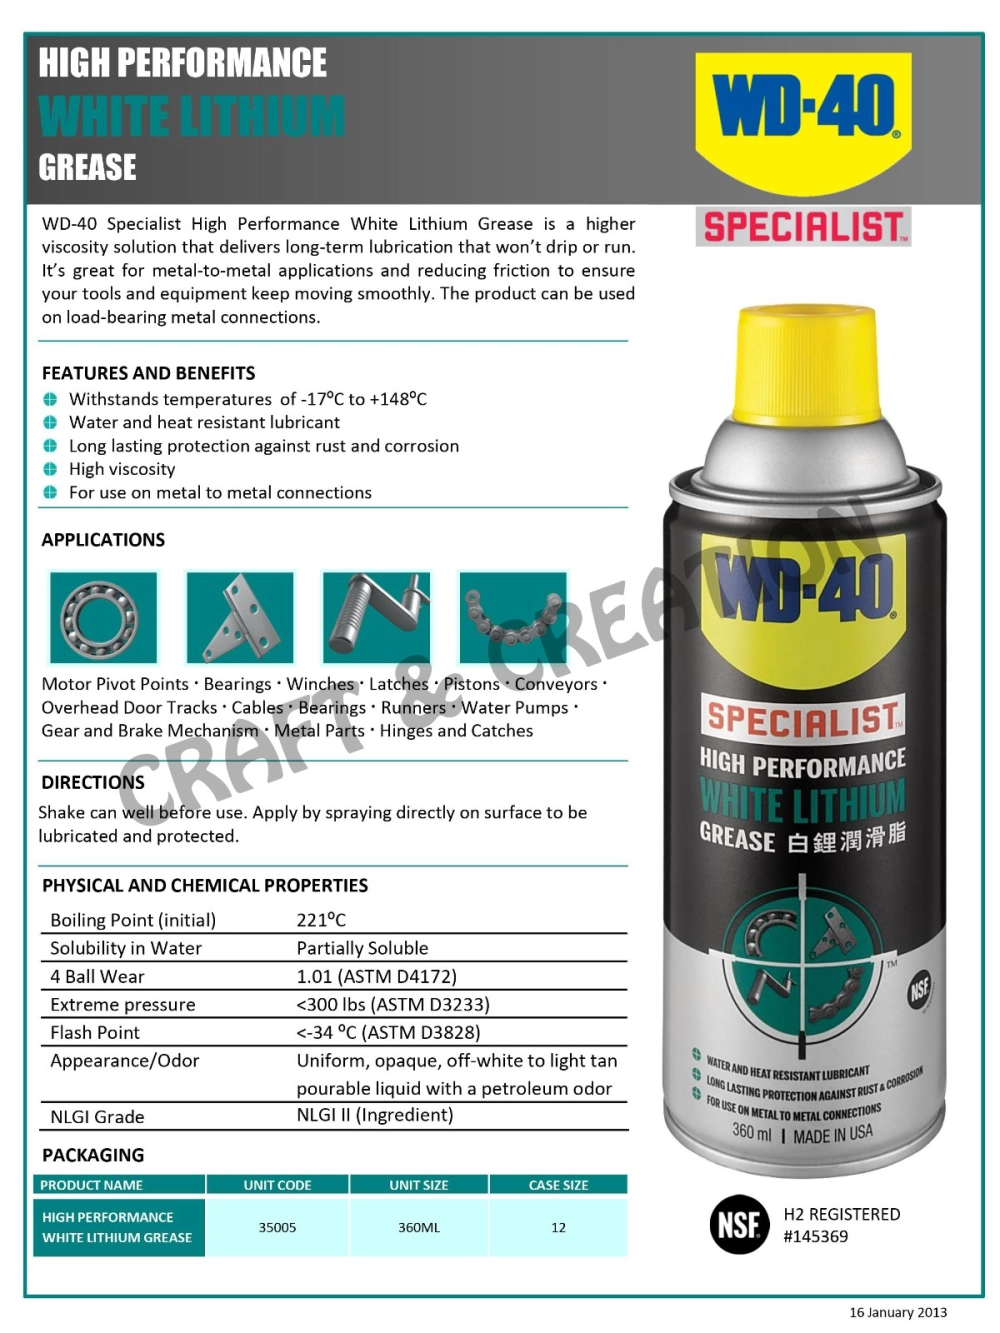 360ml WD-40 HIGH PERFORMANCE WHITE LITHIUM GREASE